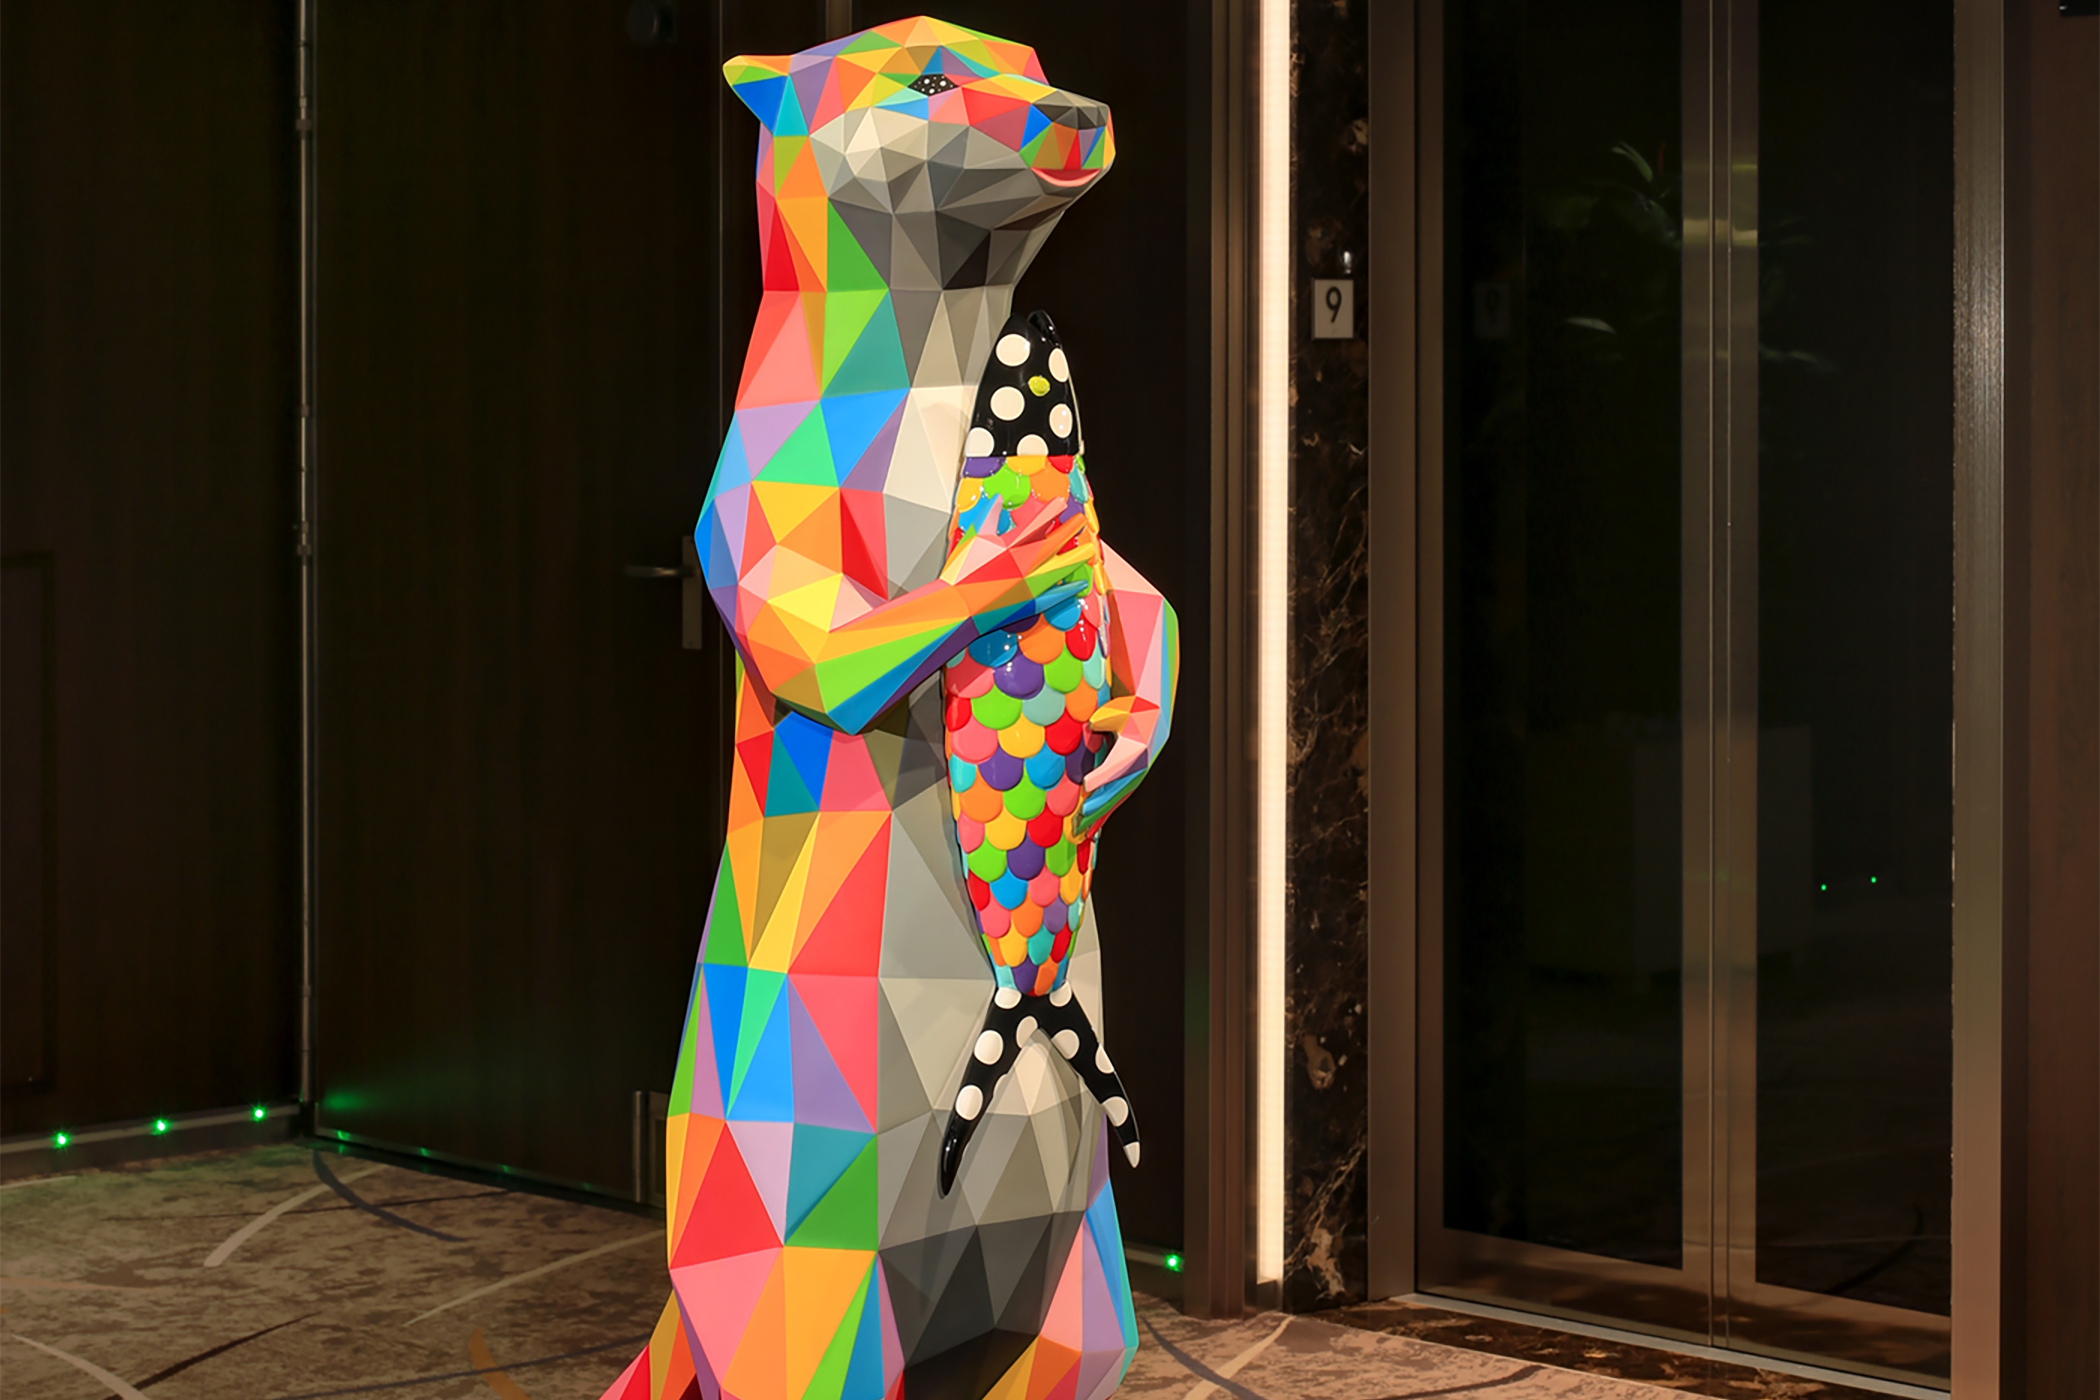 Okuda San Miguel’s fiberglass sculpture of an otter in the aft stairwell lobby on Deck 9